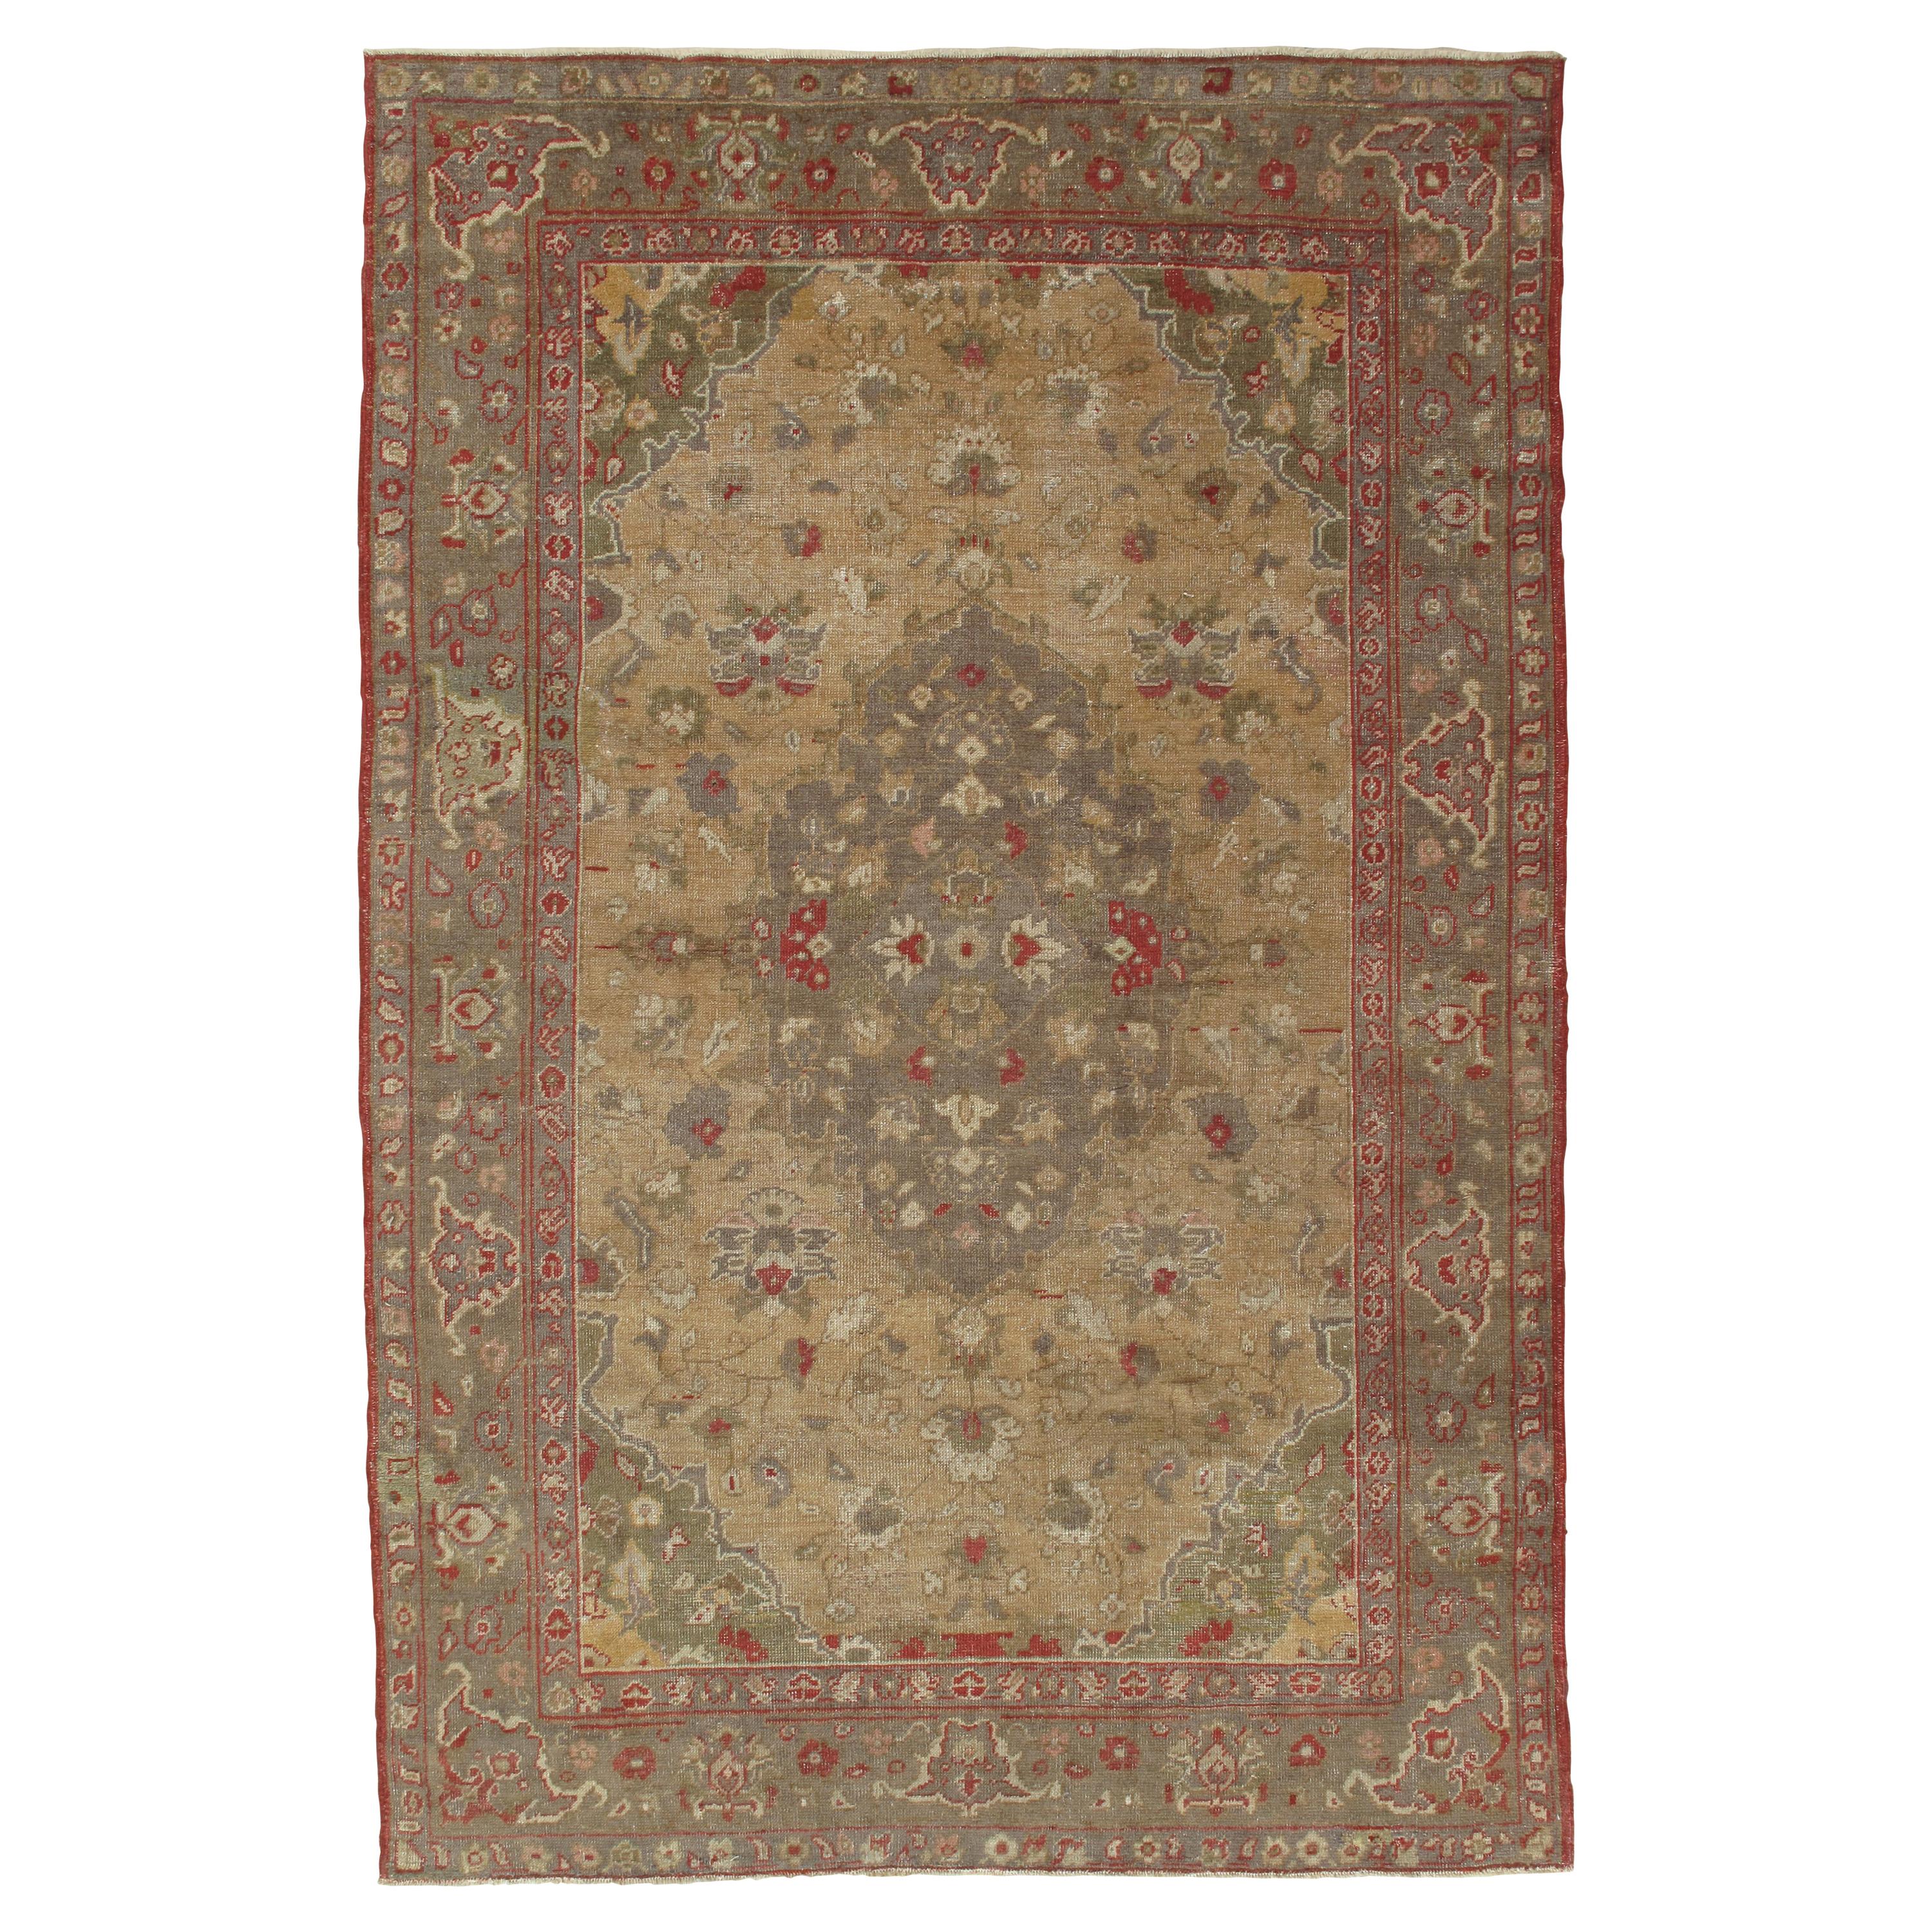 Rugs and Carpets Auctions